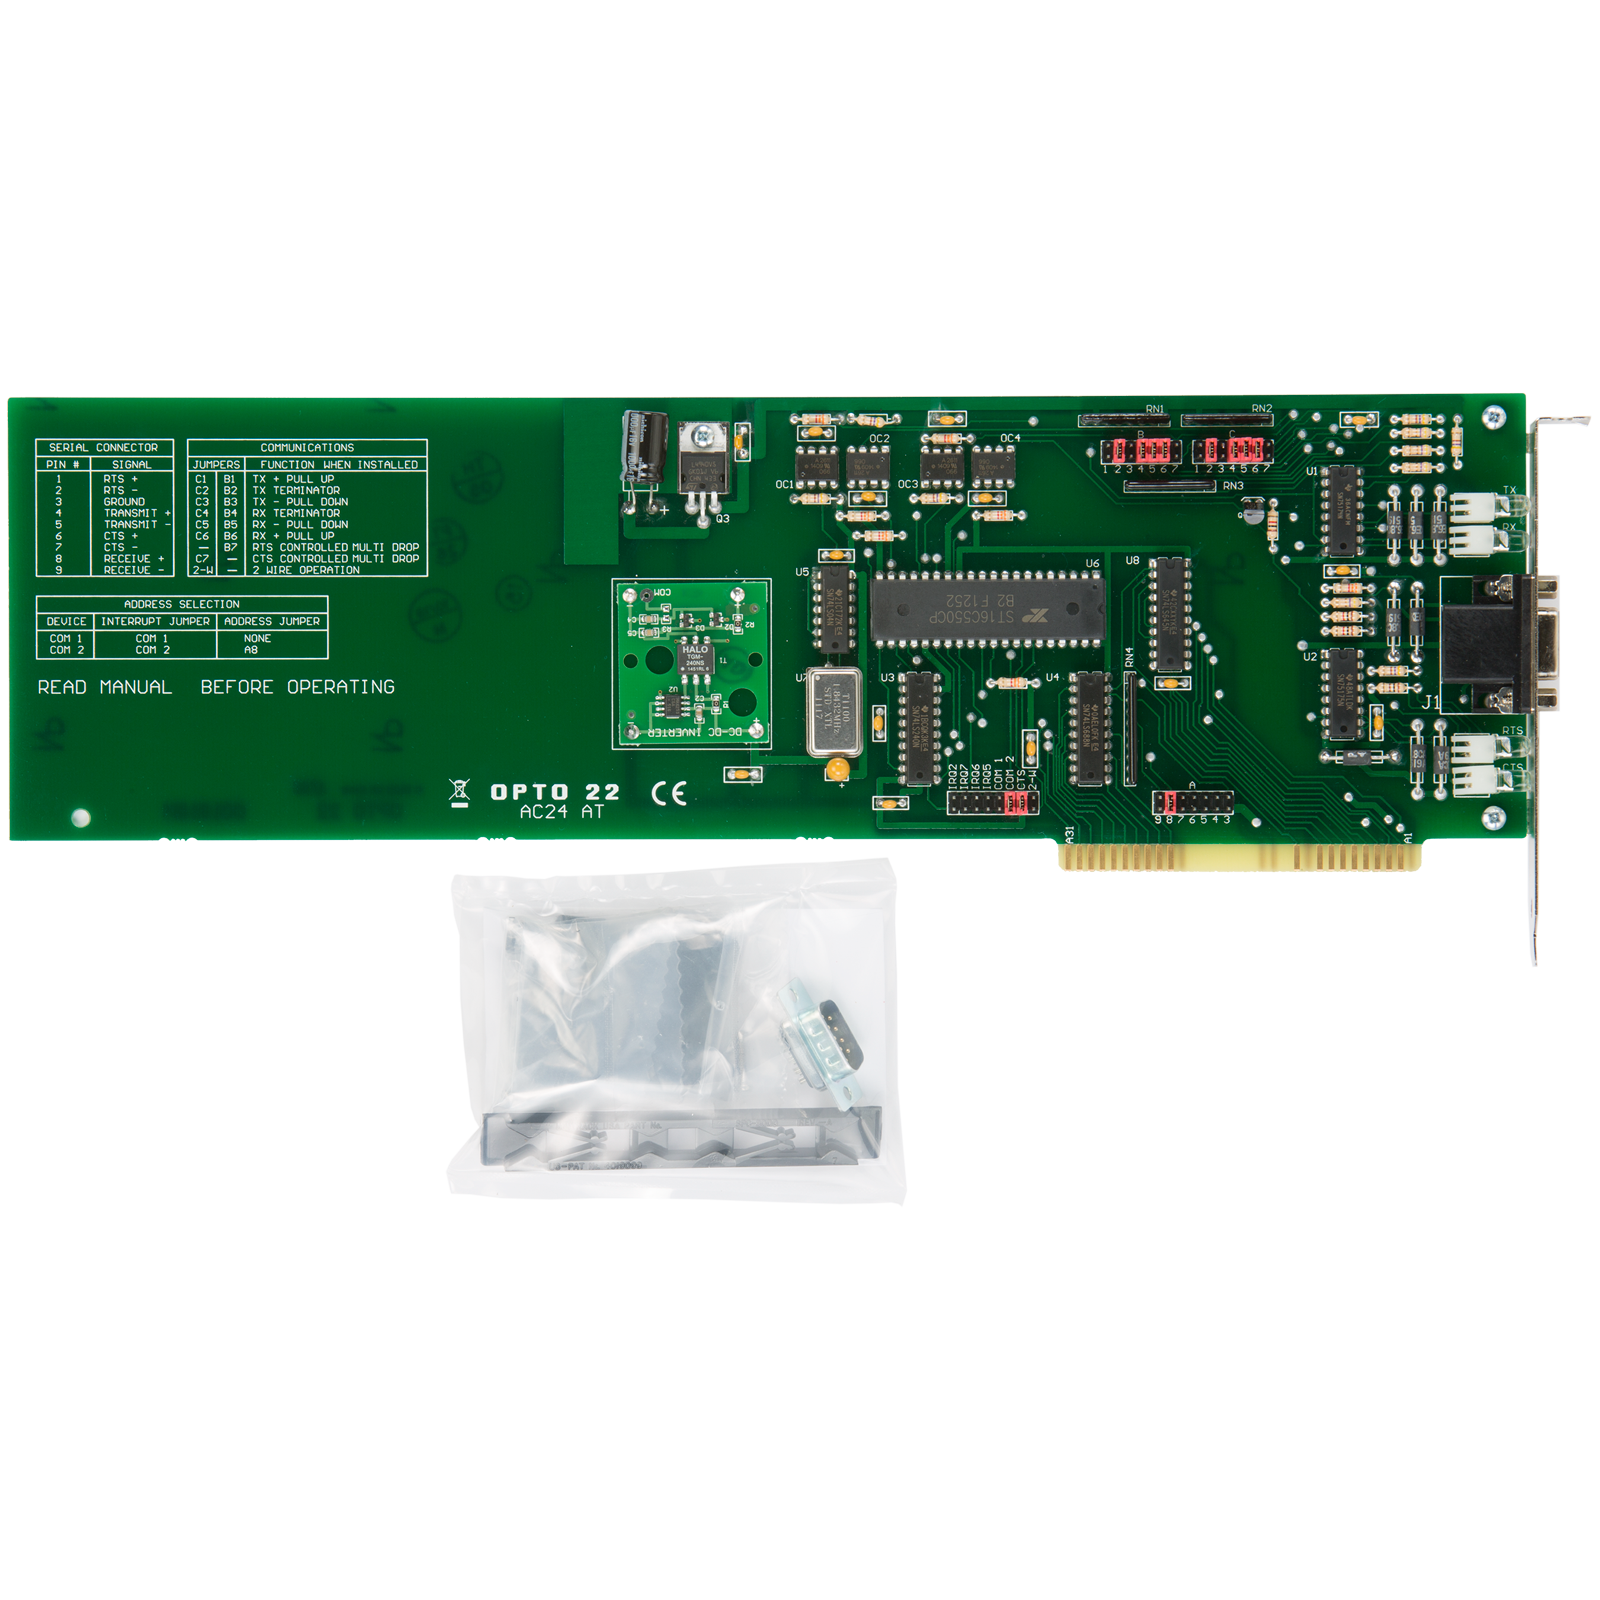 Details about  / OPTO 22 ADAPTOR BOARD CARD AC24-AT AC24 AT AC24AT 001818F